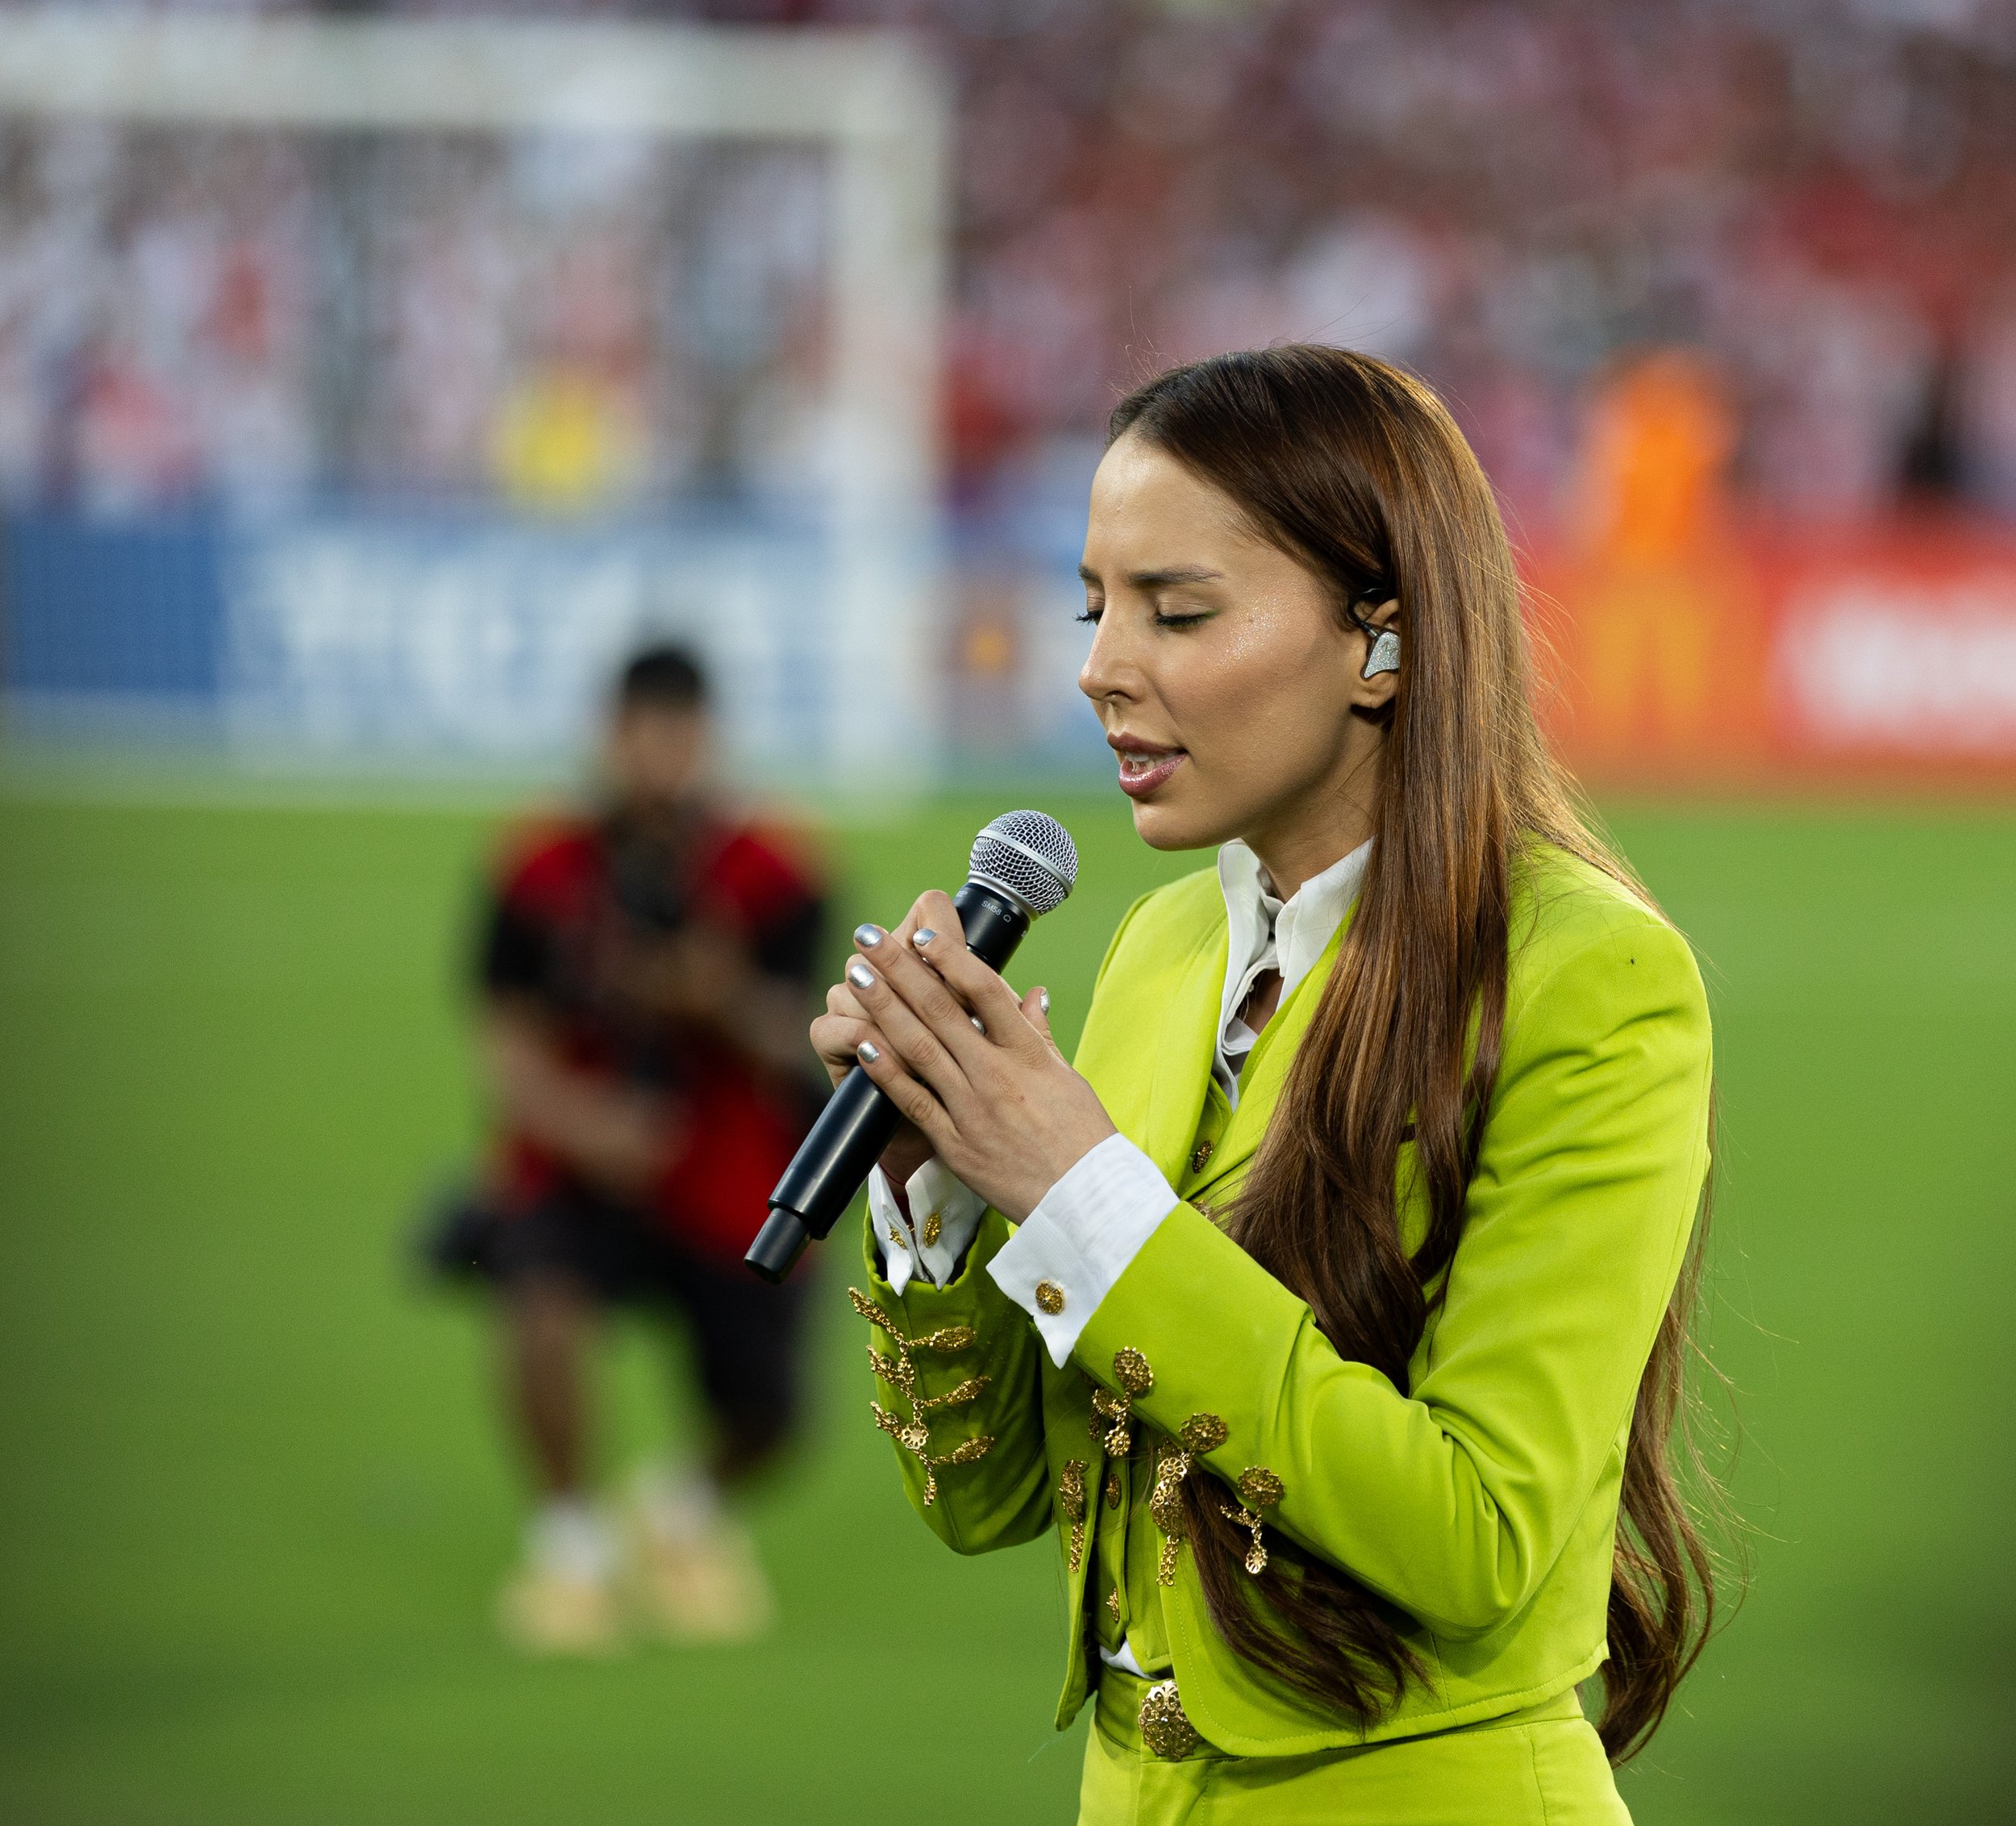  Majo Aguilar singing the national anthem of Mexico before the start of El Clasico de Mexico at the Rose Bowl in Pasadena, Calif. on Sunday, Oct. 15. (Danilo Perez | The Corsair) 